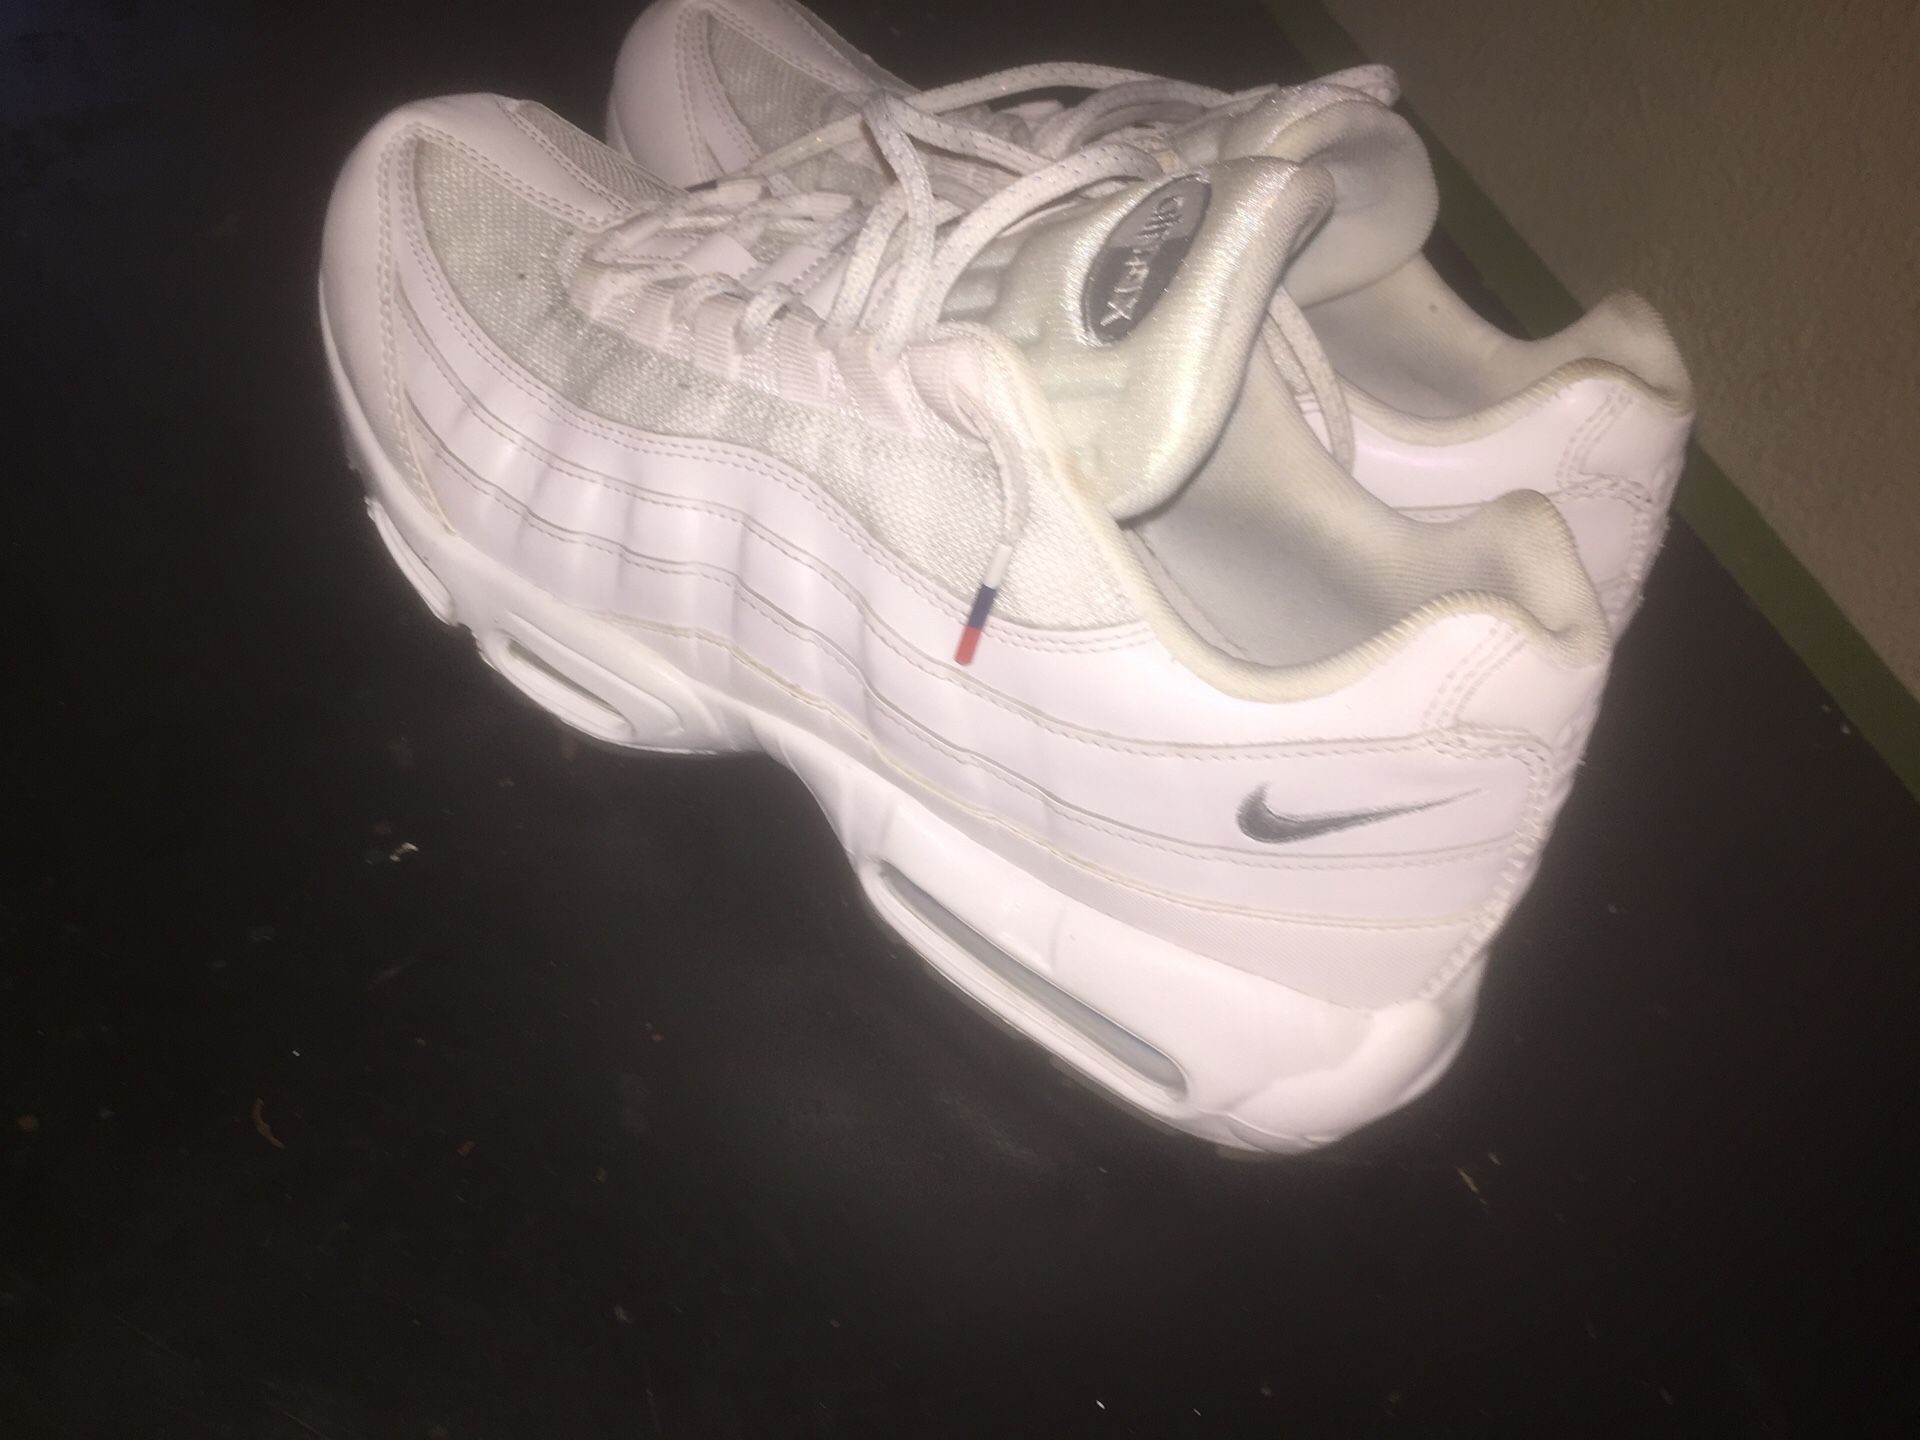 Air max 95 size 10.5 new